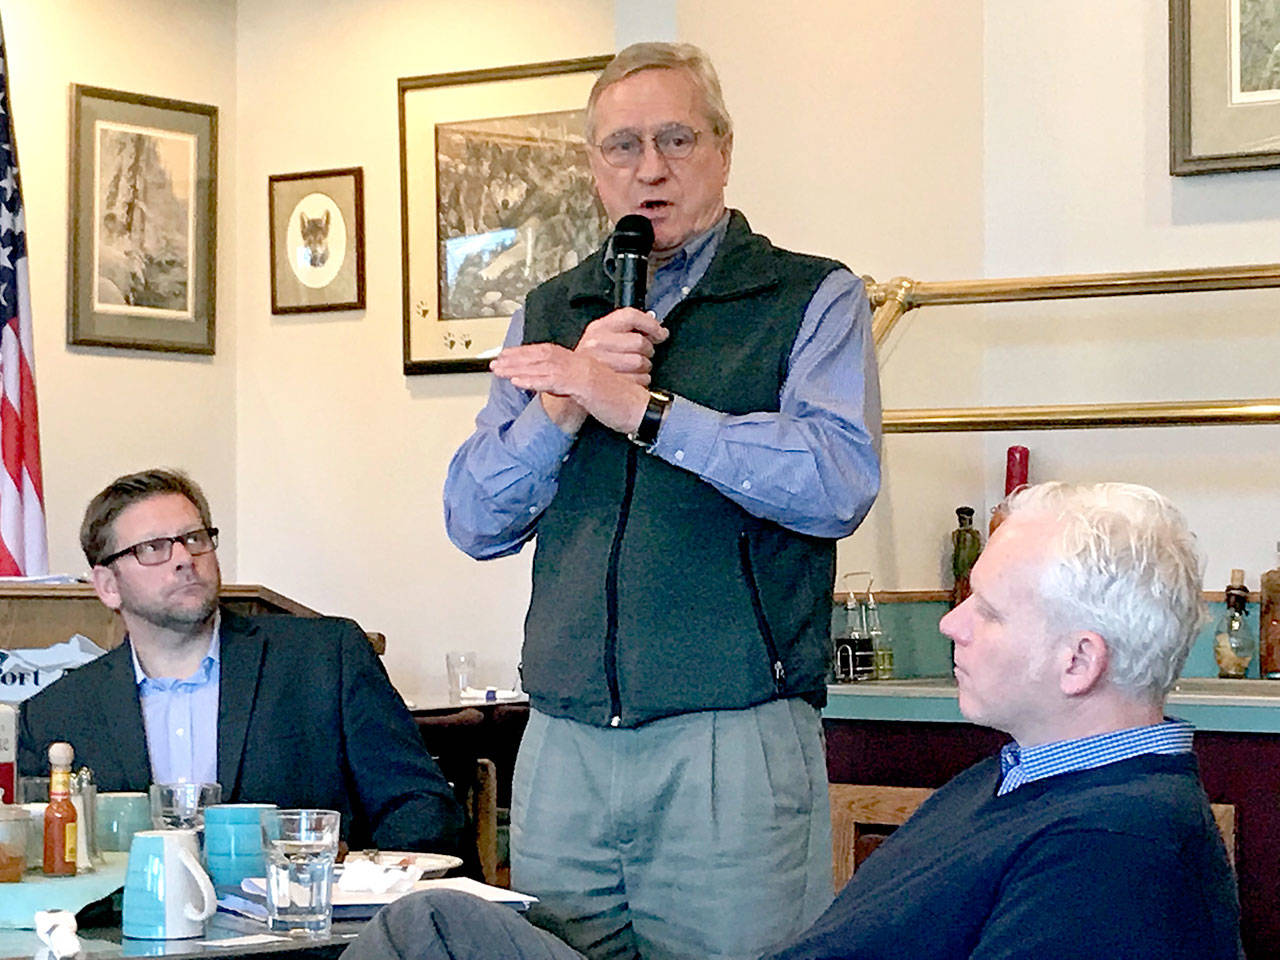 State Rep. Steve Tharinger of Port Townsend joined state Rep. Mike Chapman of Port Angeles, left, and state Sen. Kevin Van De Wege of Sequim, right, to review the 2019 legislative session Tuesday at a breakfast meeting. (Paul Gottlieb/Peninsula Daily News)